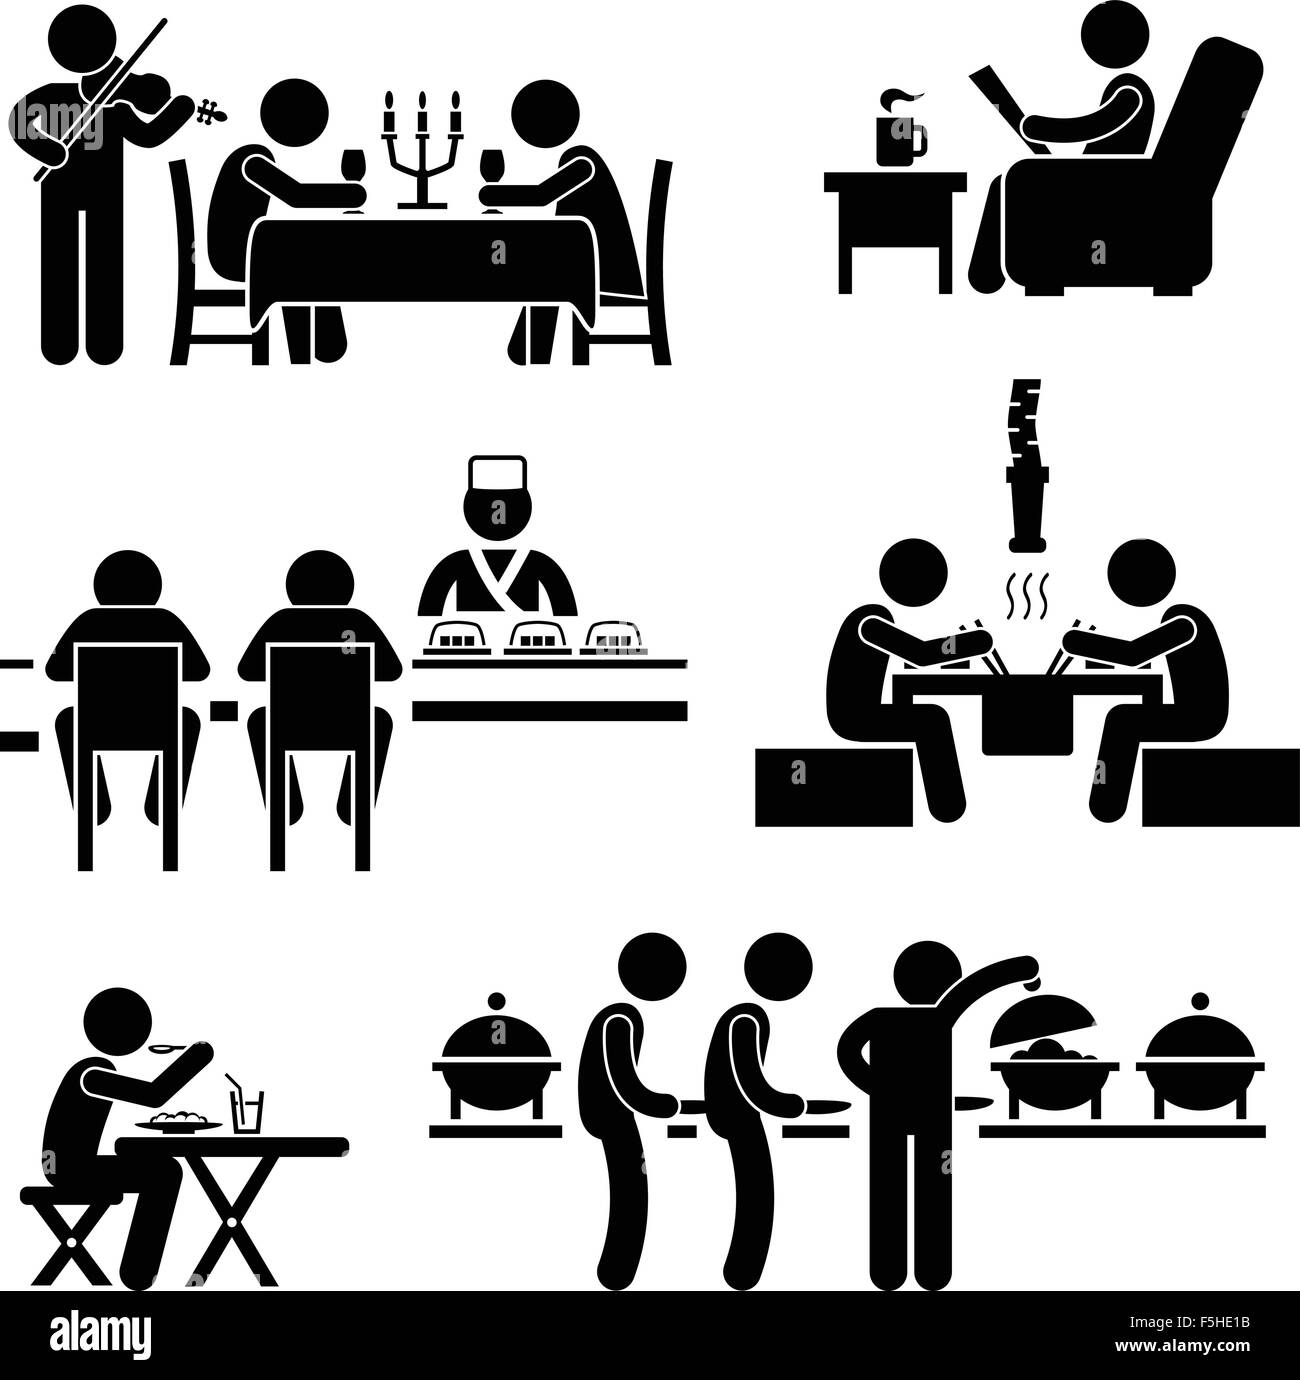 Restaurant Cafe Food Drink Candlelight Dinner Coffee Shop Japanese Sushi Korean BBQ Buffet Stick Figure Pictogram Icon Stock Vector